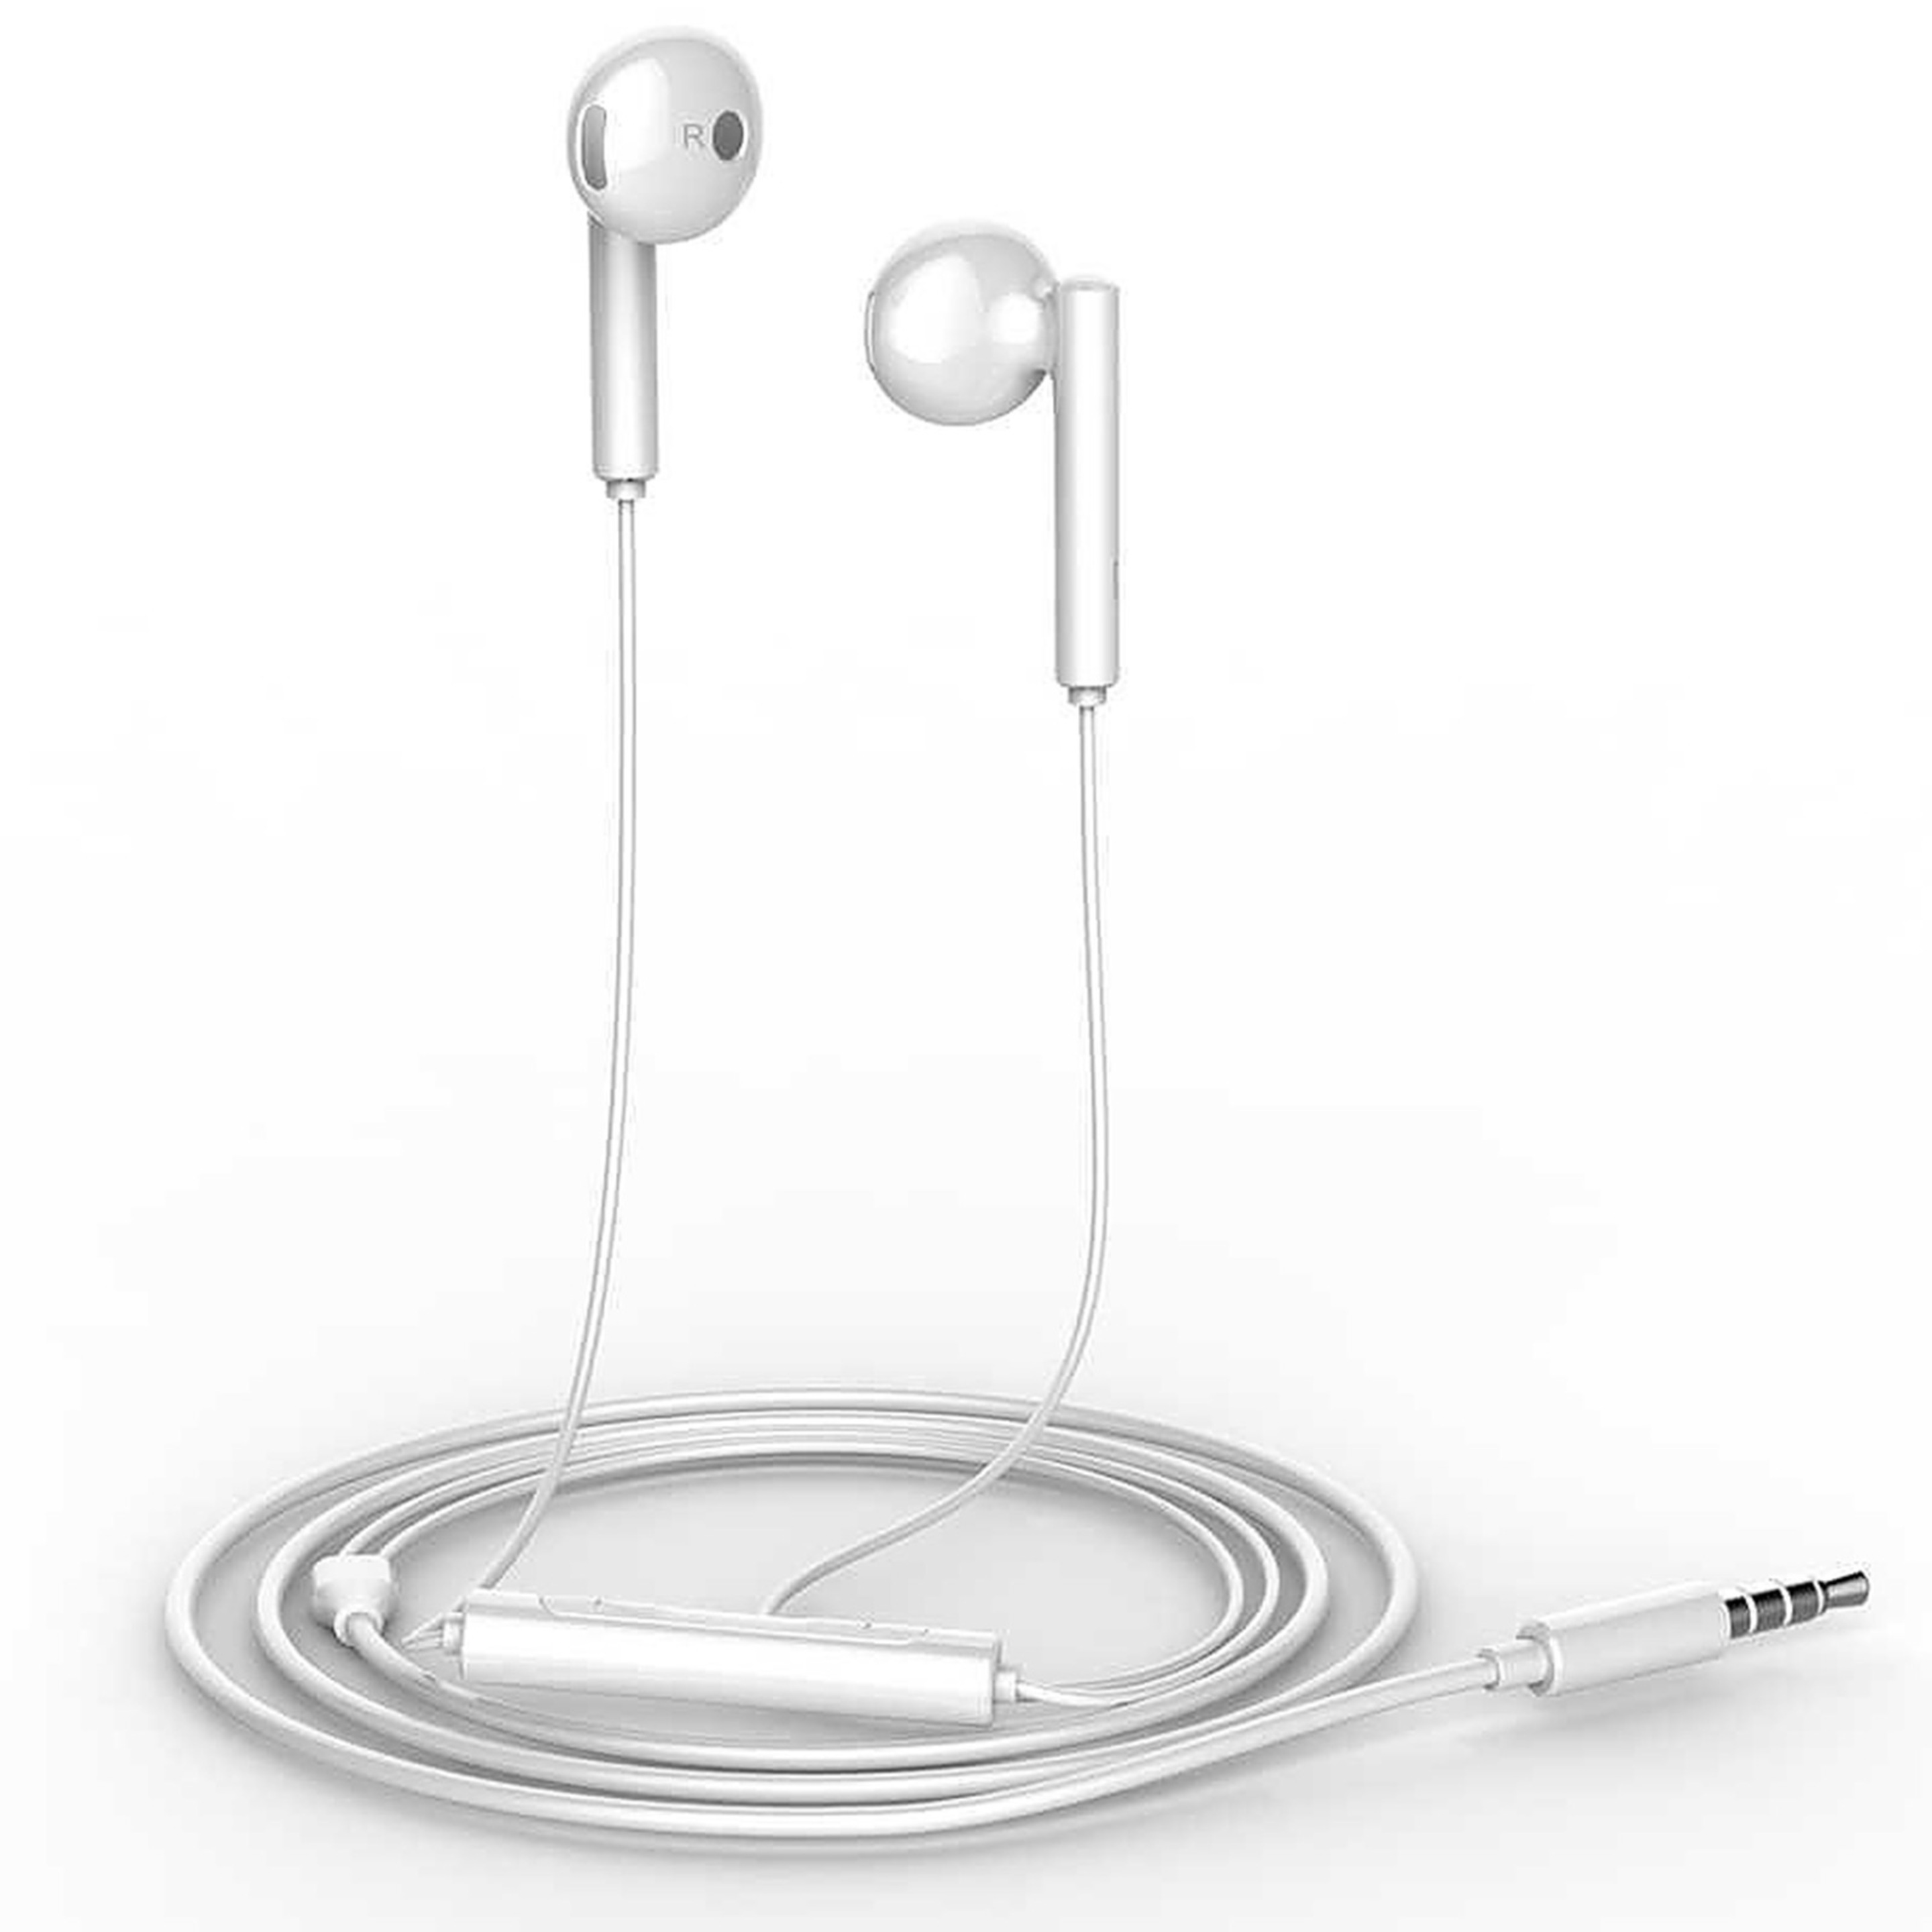 Auriculares Oficiales Huawei Am115s - Blanco  MKP